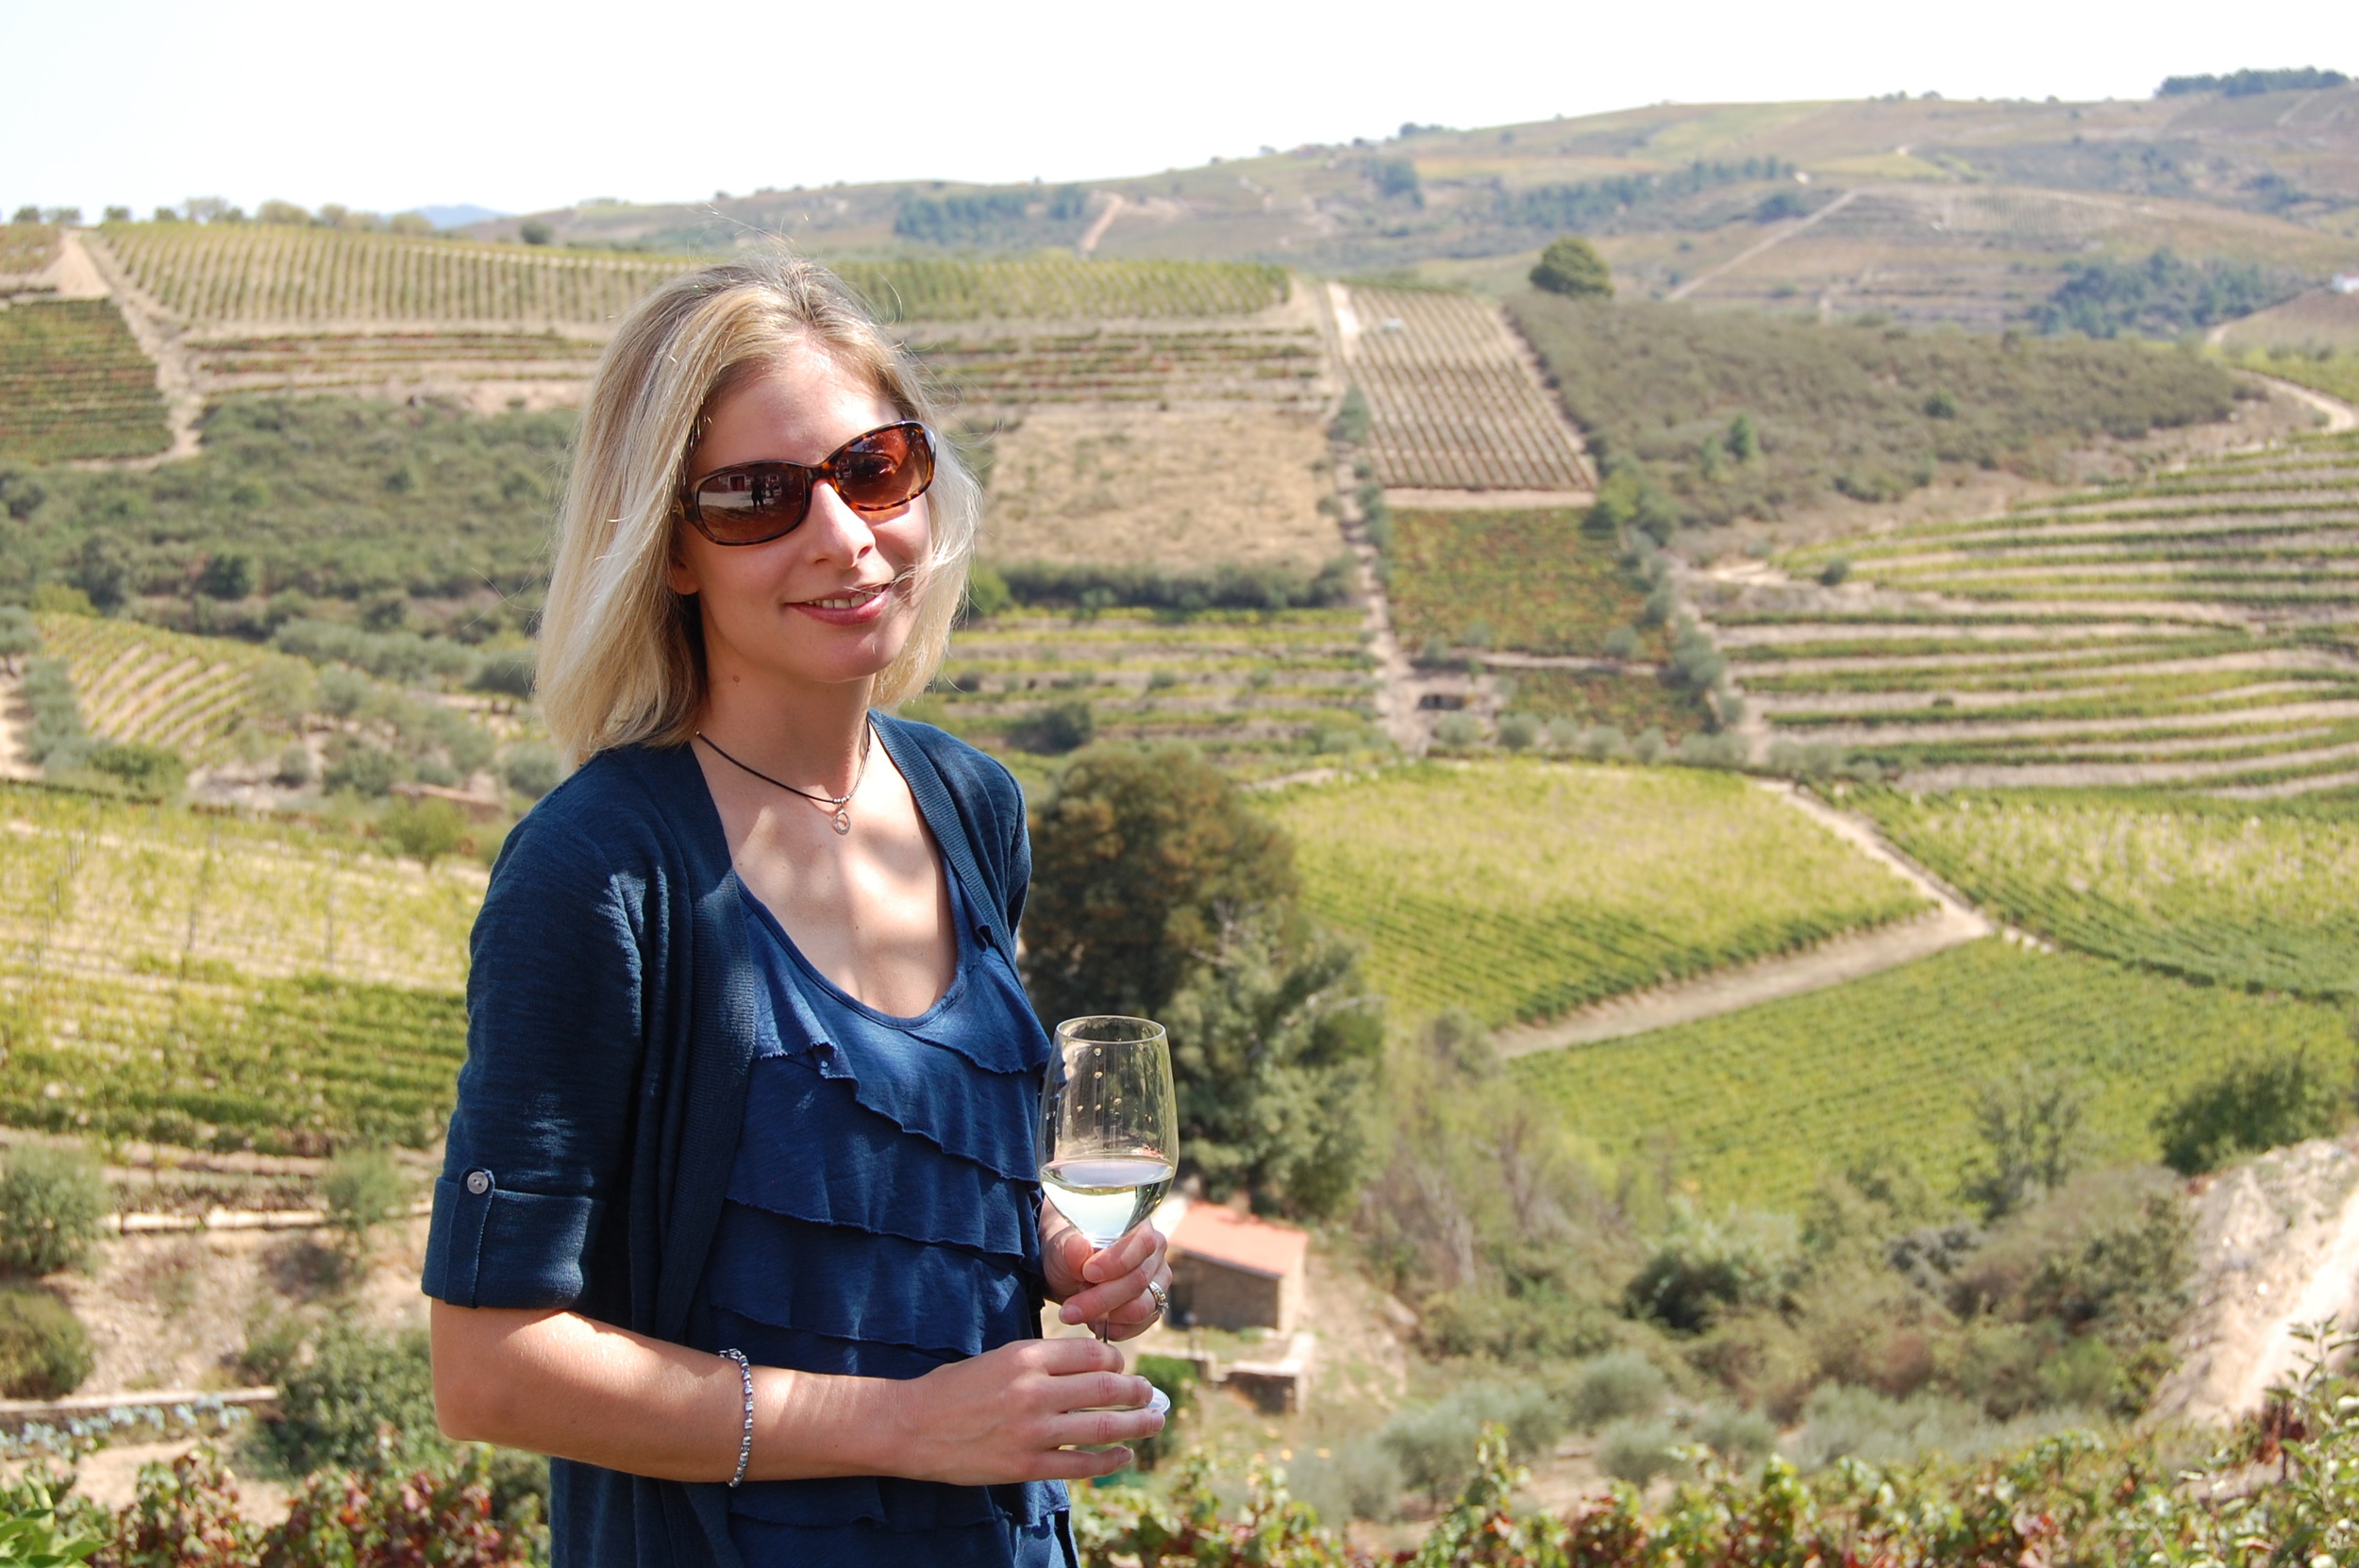 In Portugal's Douro Valley.